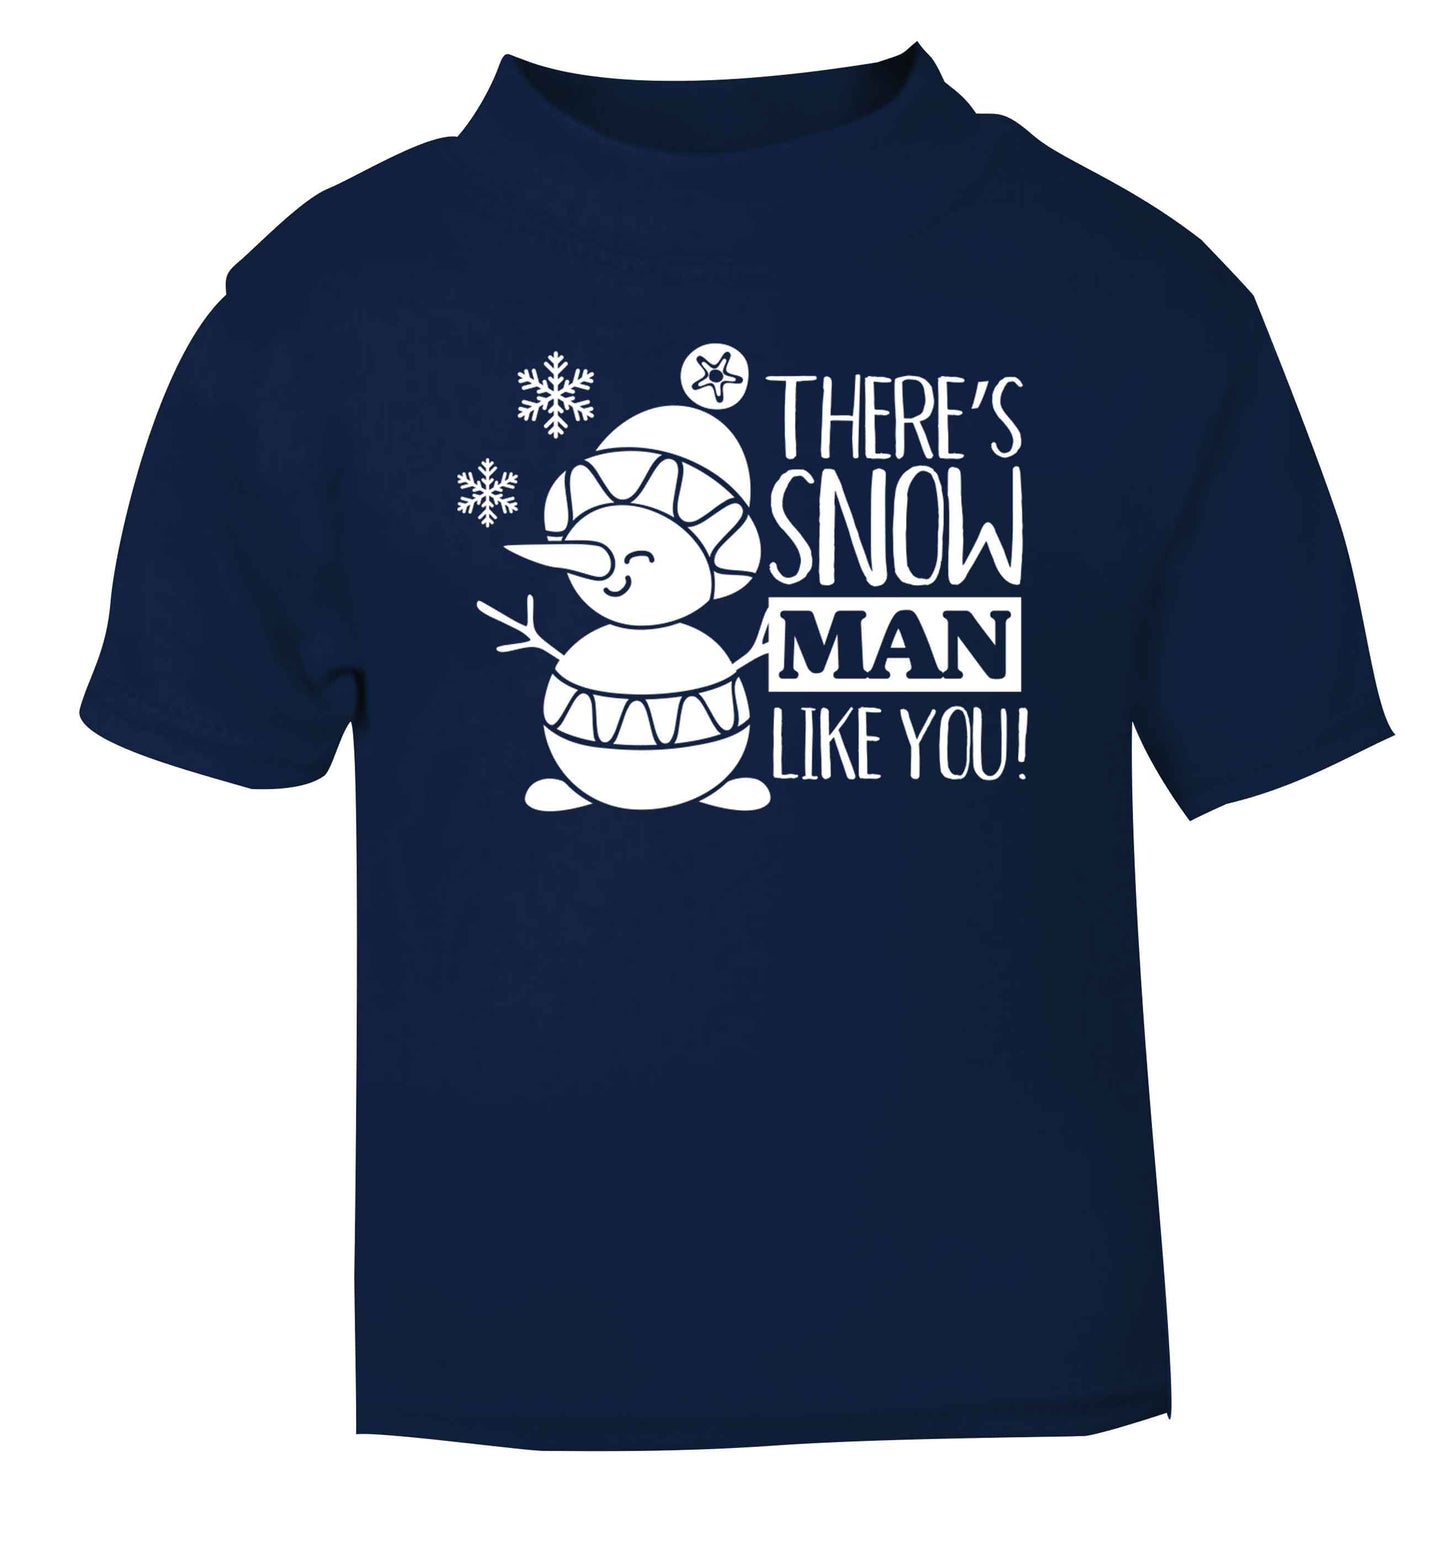 There's snow man like you navy baby toddler Tshirt 2 Years